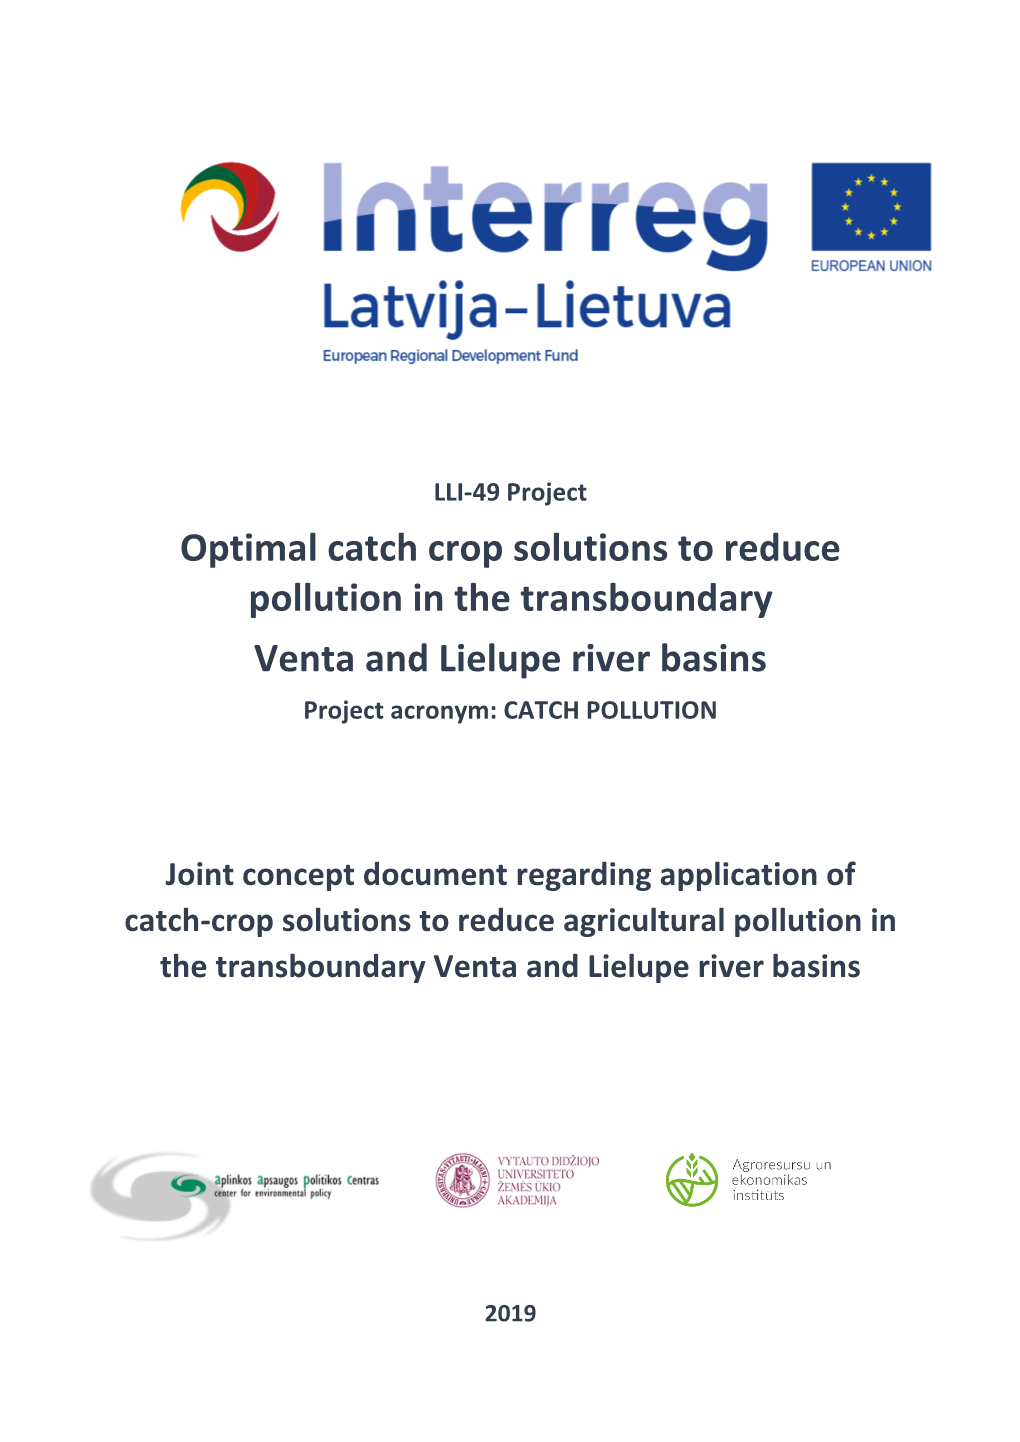 Joint Concept Document Regarding Application of Catch Crop Solutions